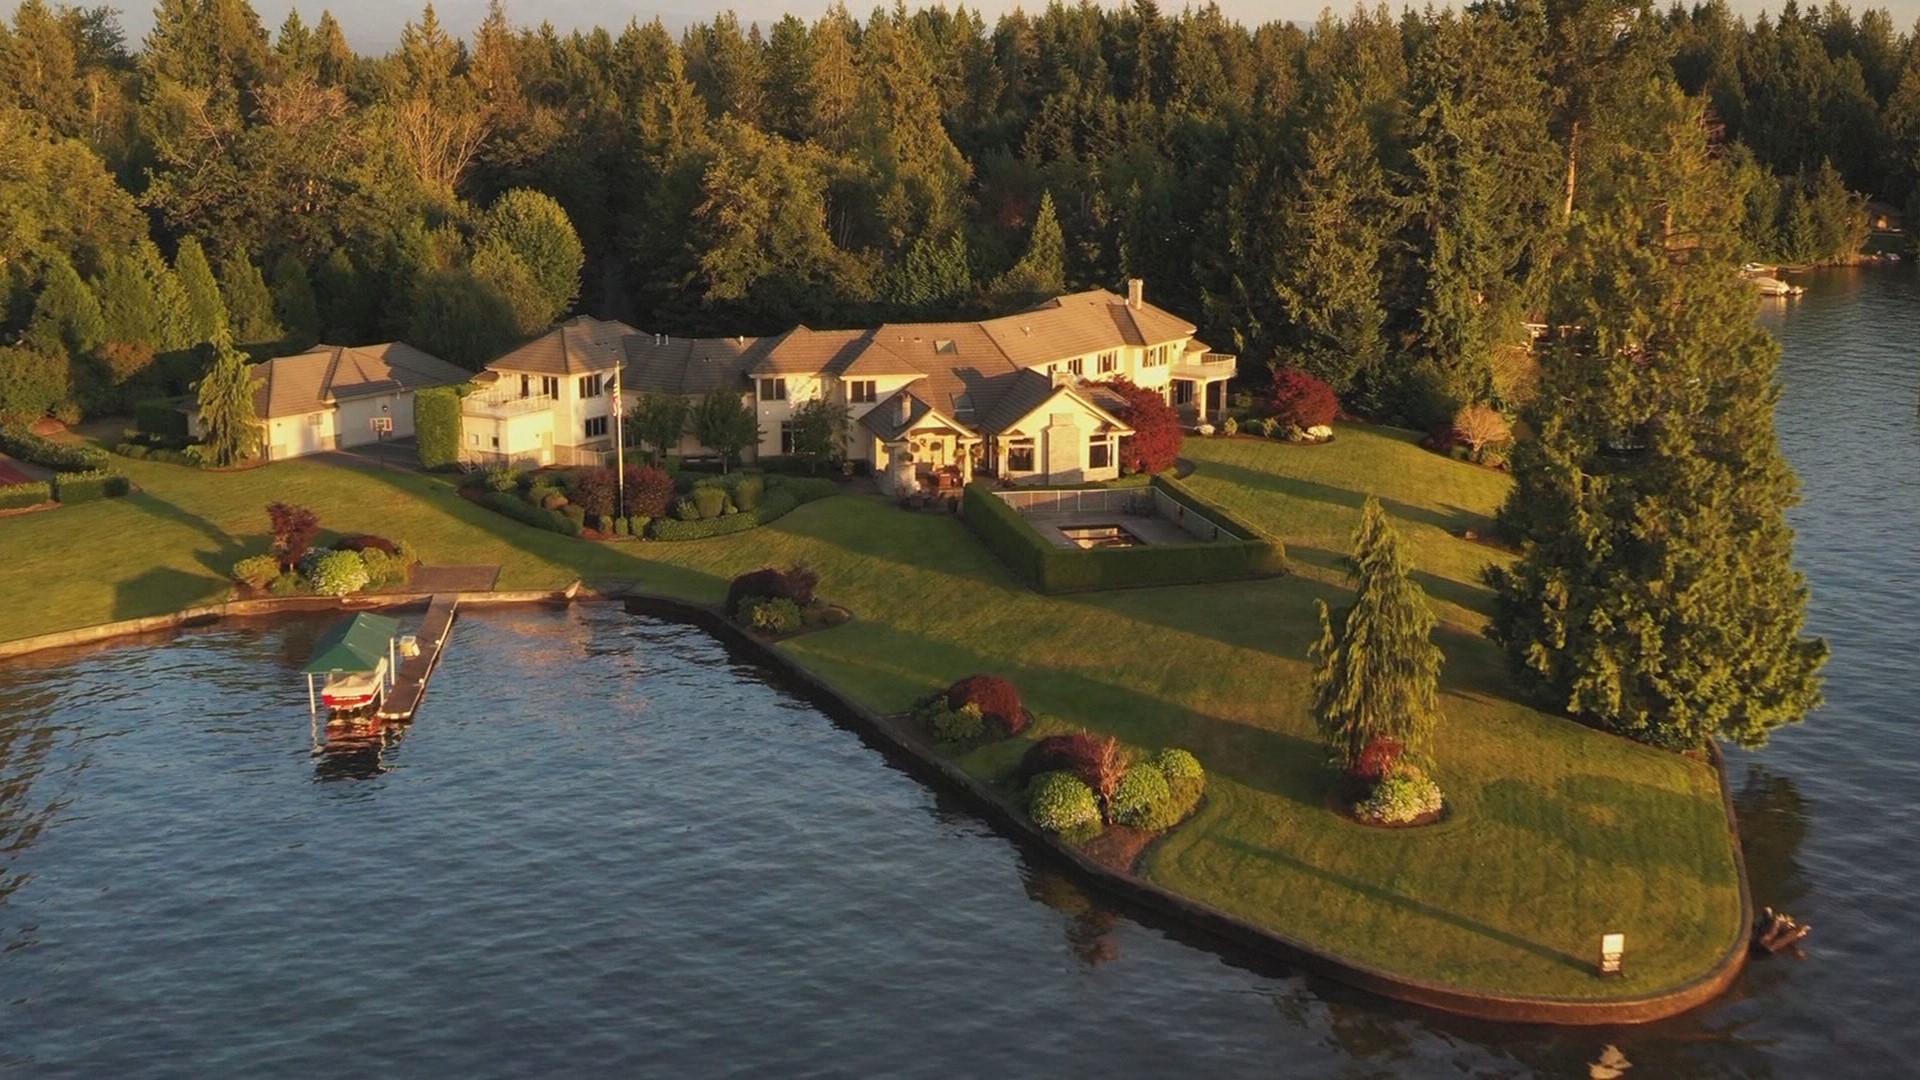 Watersport paradise on Lake Tapps is just 45 minutes from Seattle. Sponsored by The Jen Harper Team.